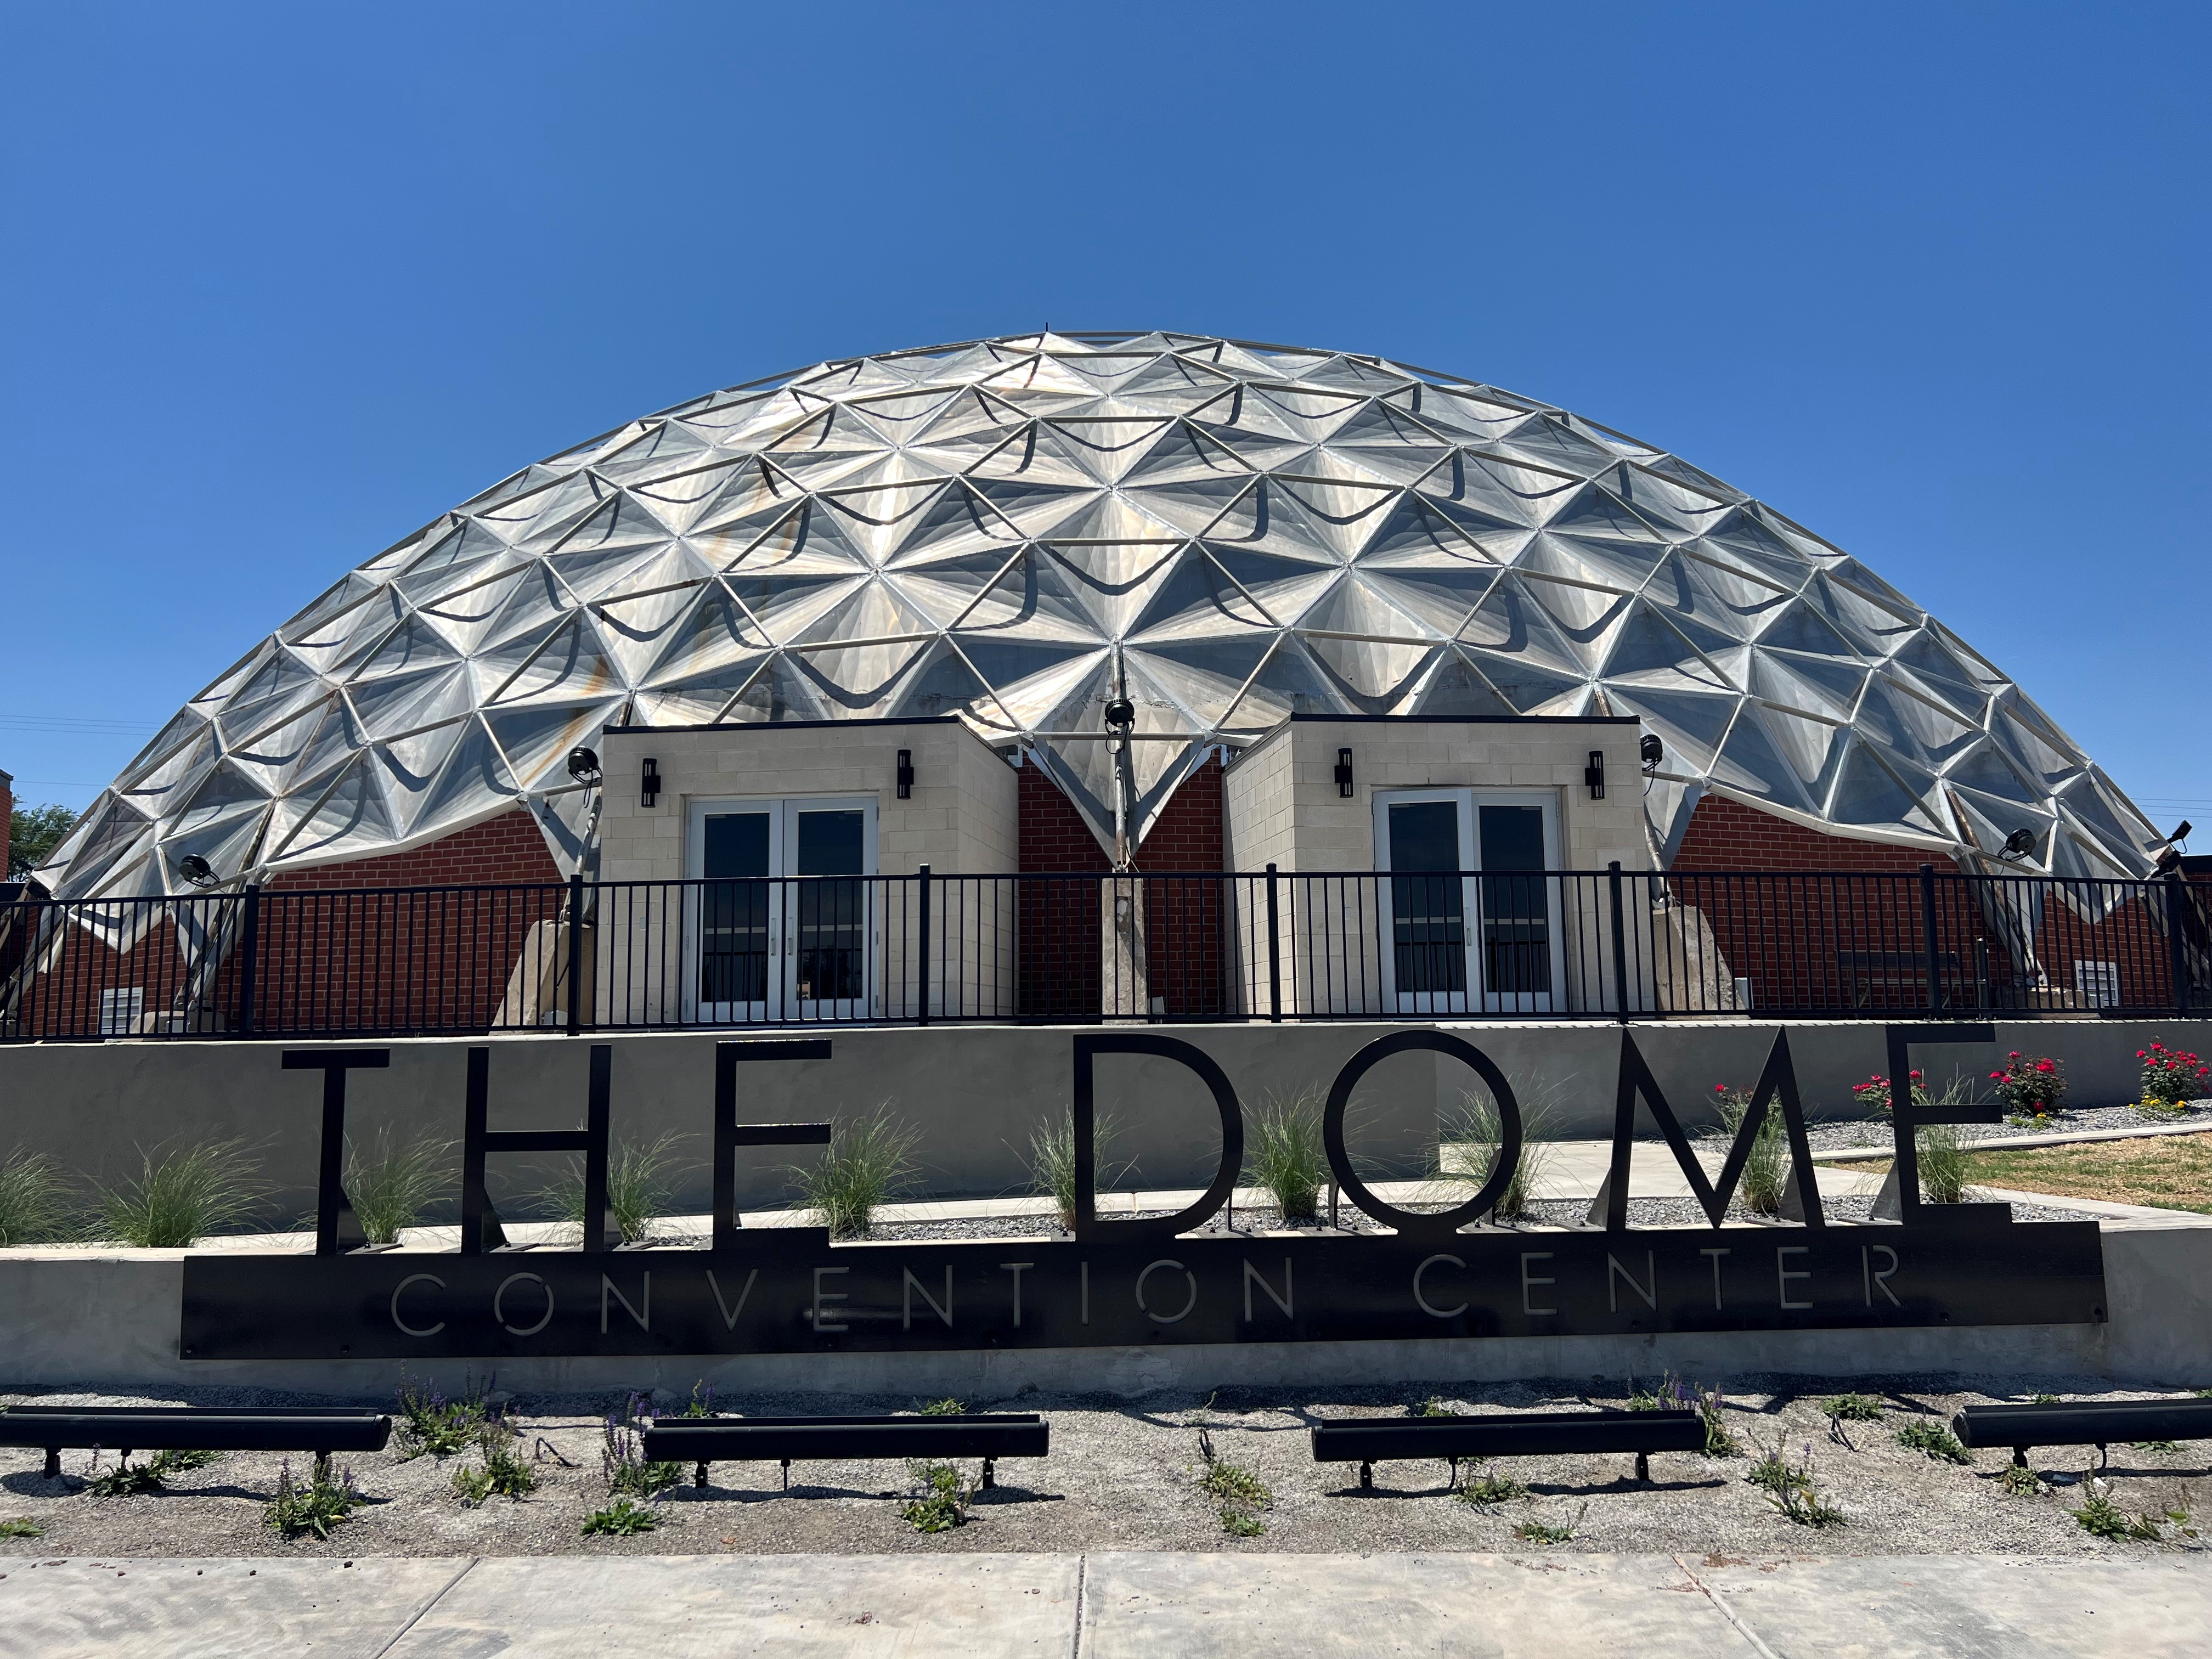 The Dome outside picture